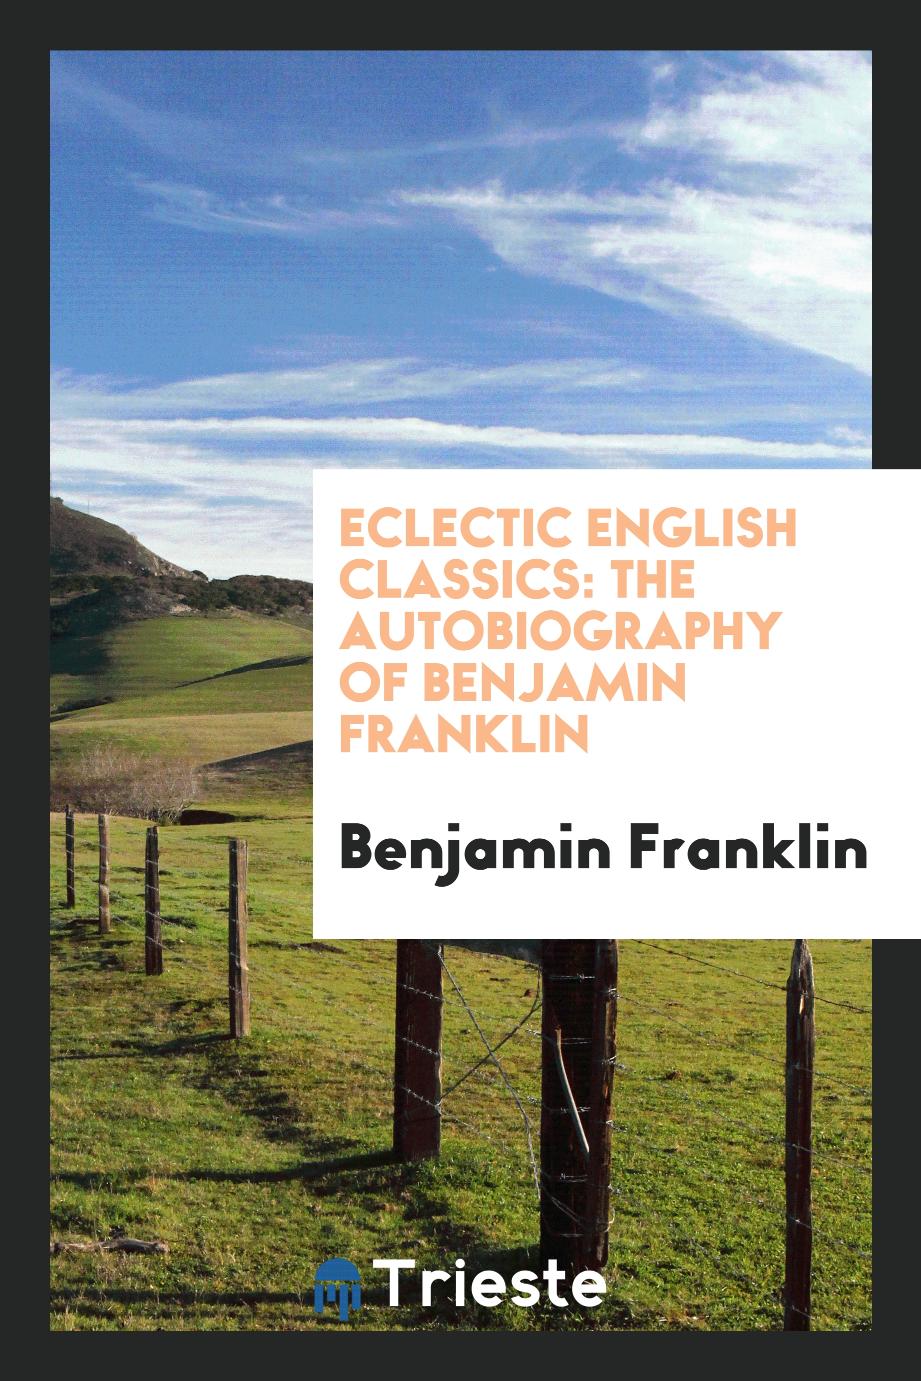 Eclectic English Classics: The Autobiography of Benjamin Franklin